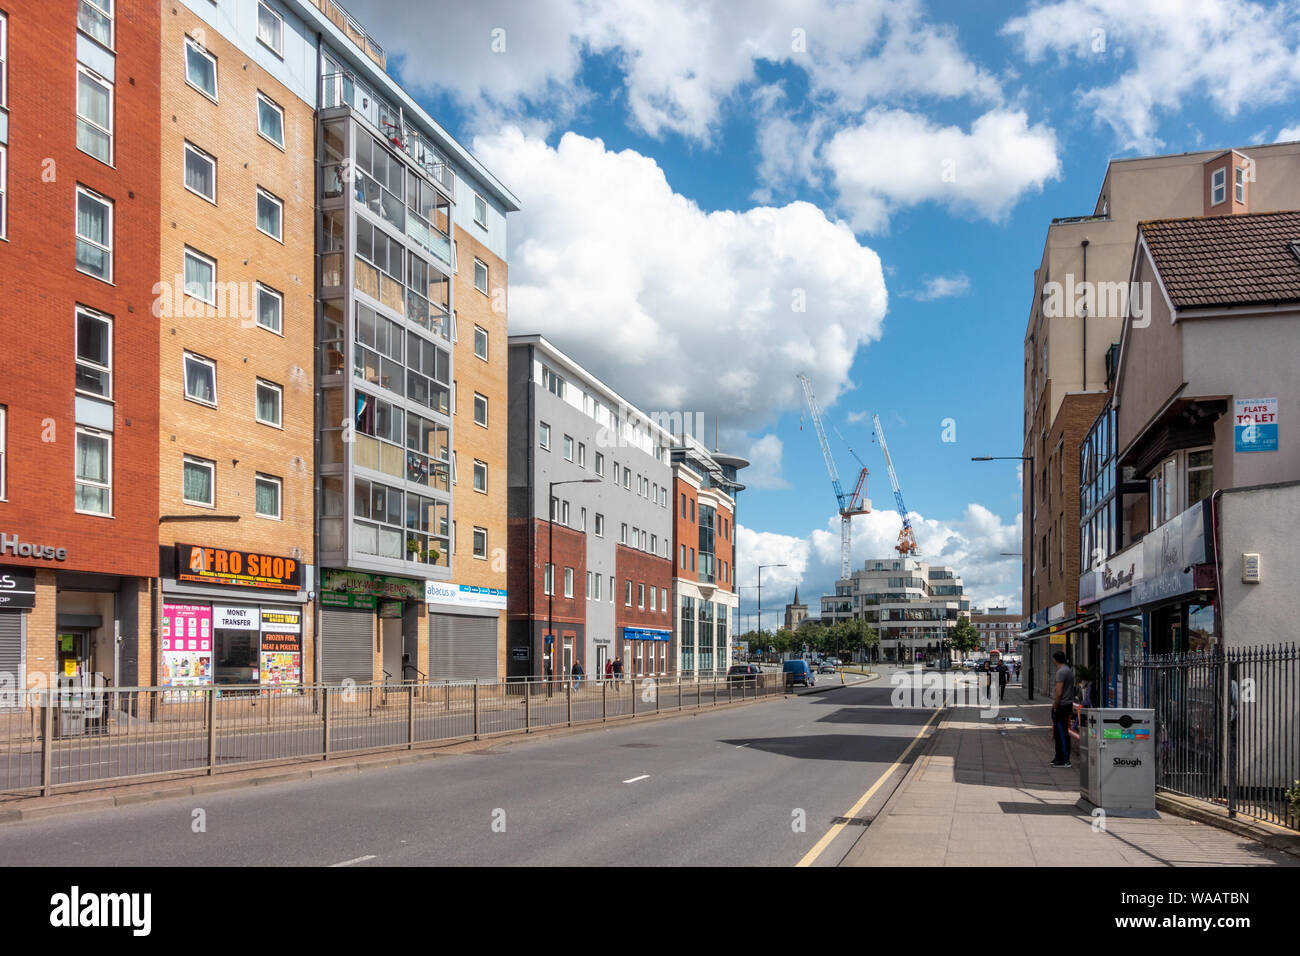 A view along the A4 Bath Road looking towards the centre of the town of Slough in Berkshire, UK Stock Photo